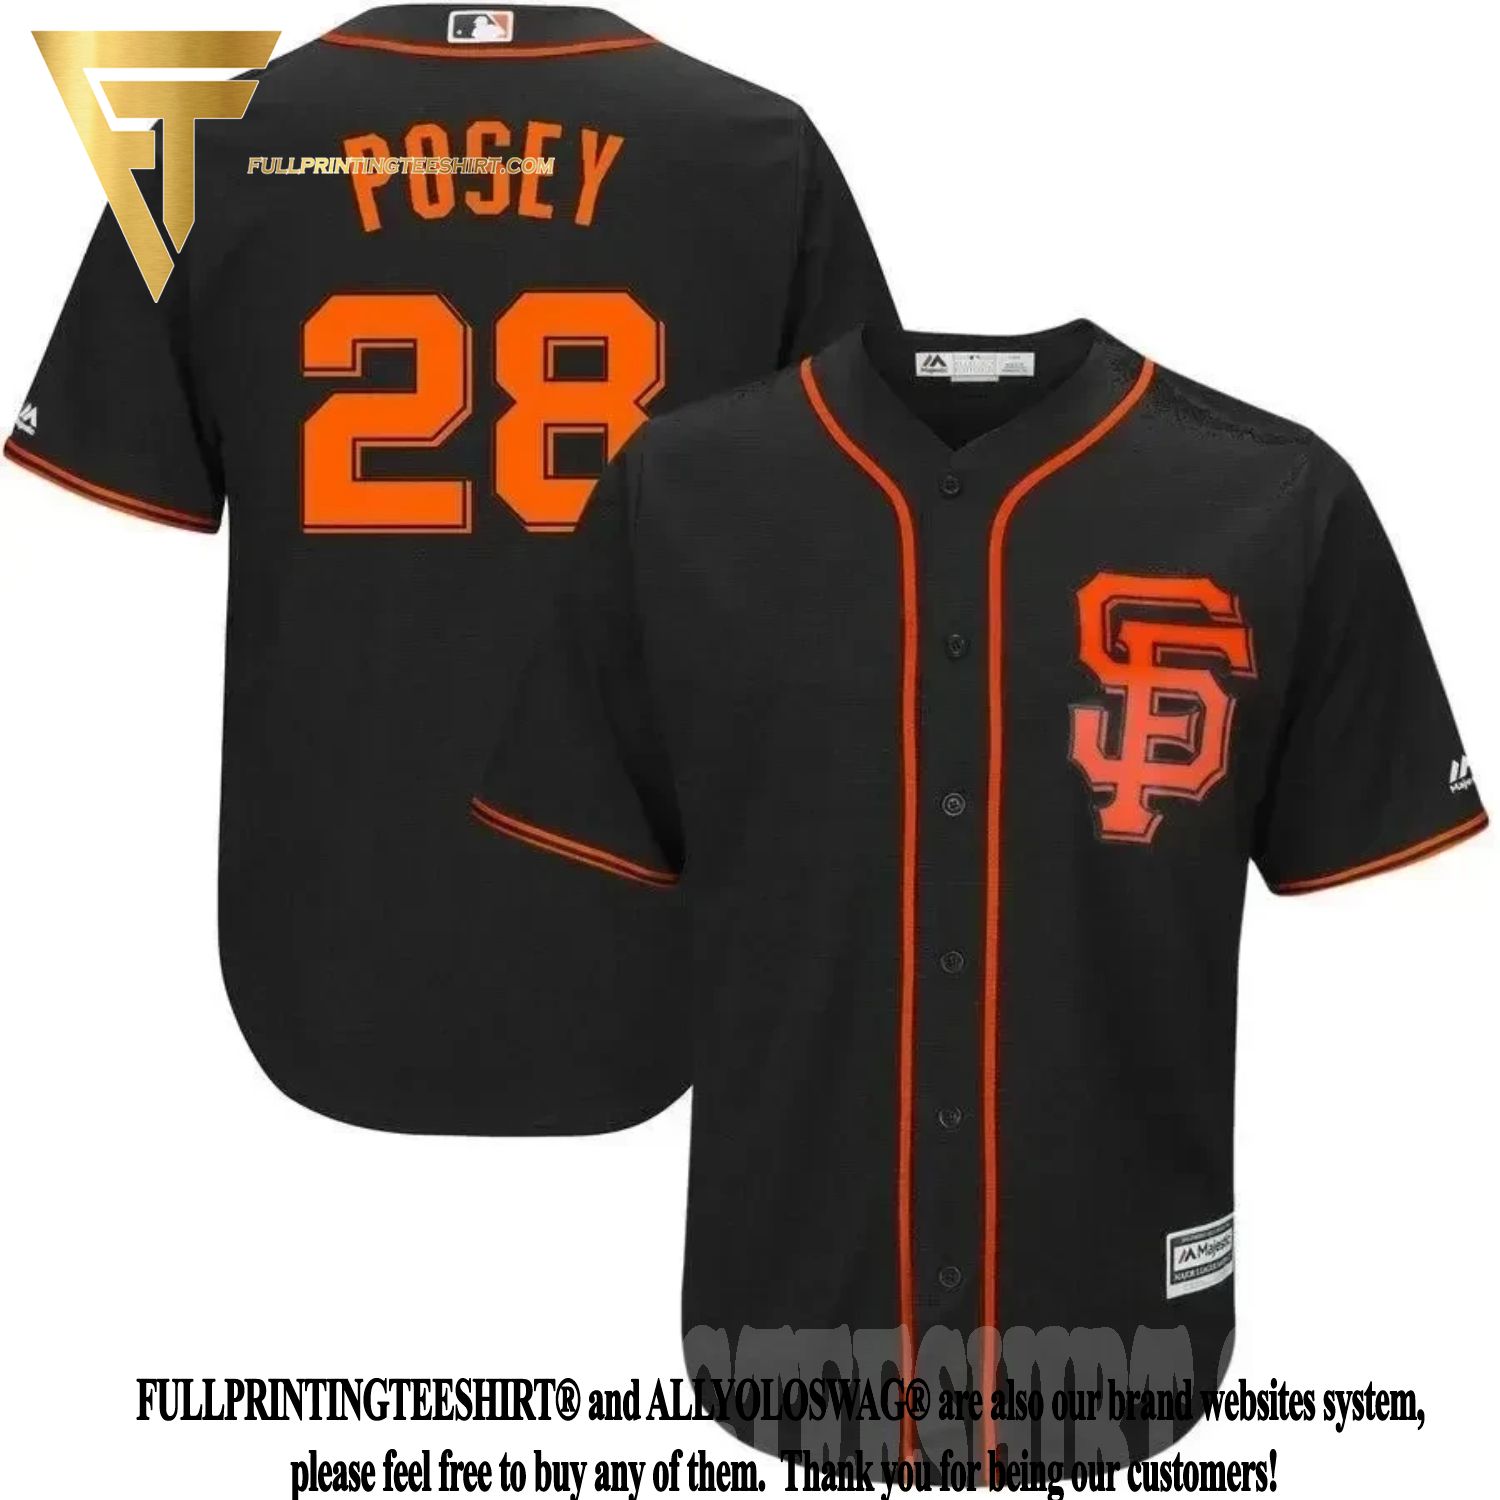 Top-selling Item] Buster Posey San Francisco Giants Official Team